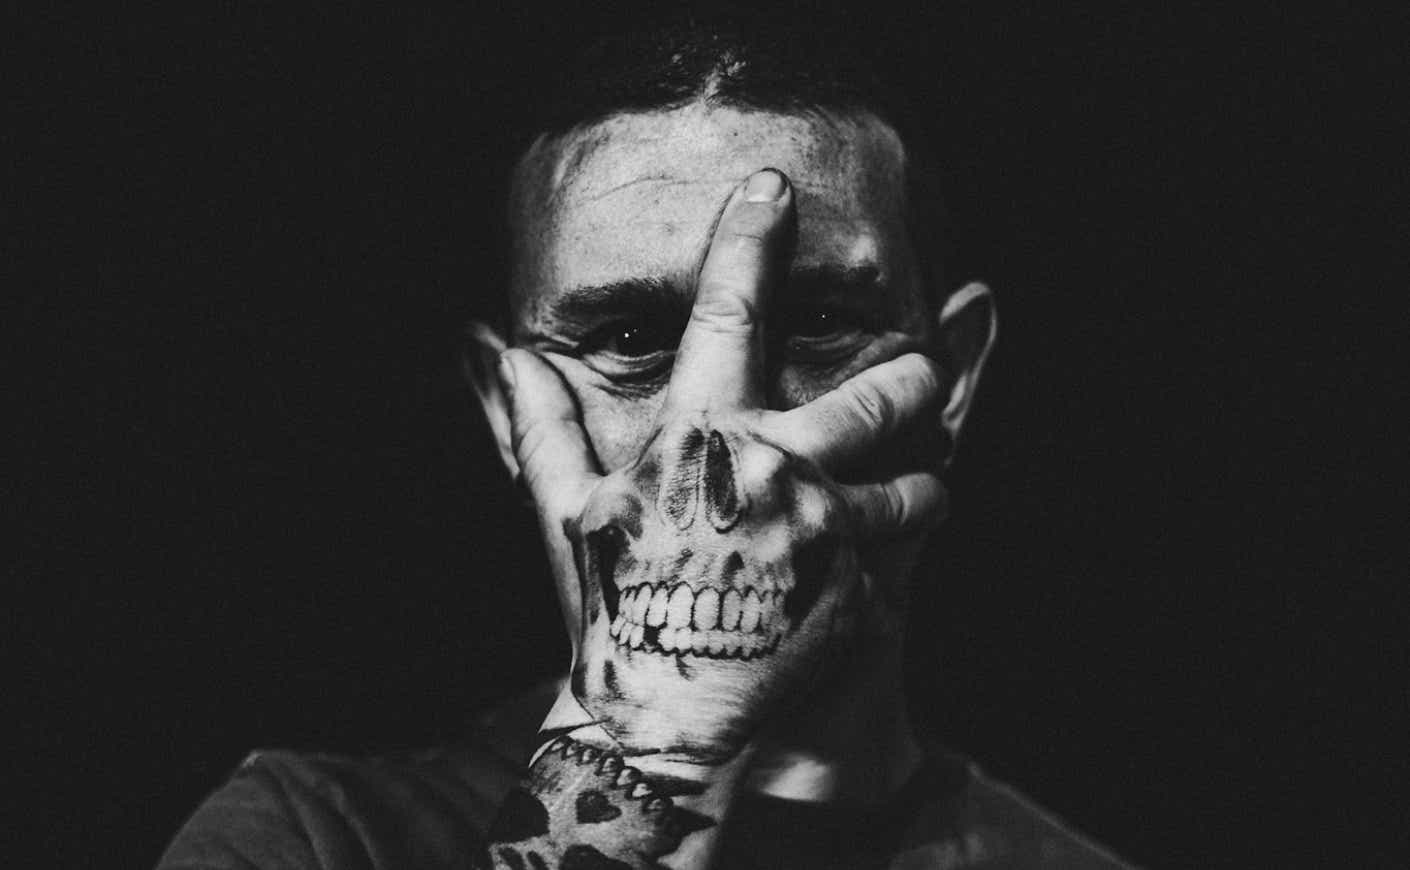 A man covers his face with his hand, which has a skull tattoo